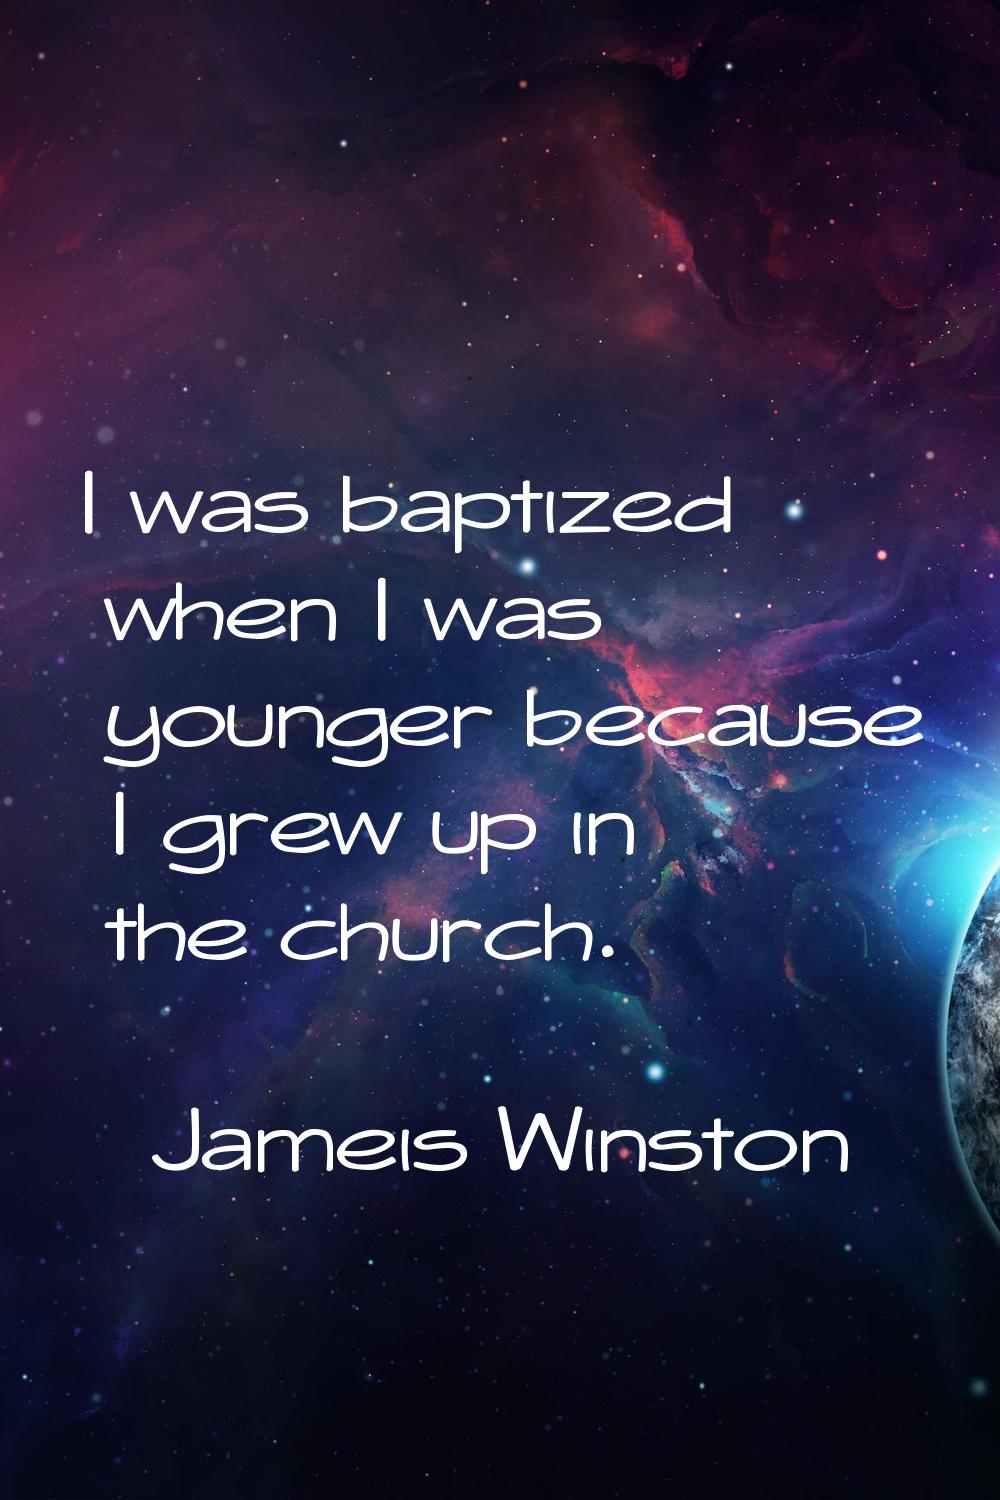 I was baptized when I was younger because I grew up in the church.